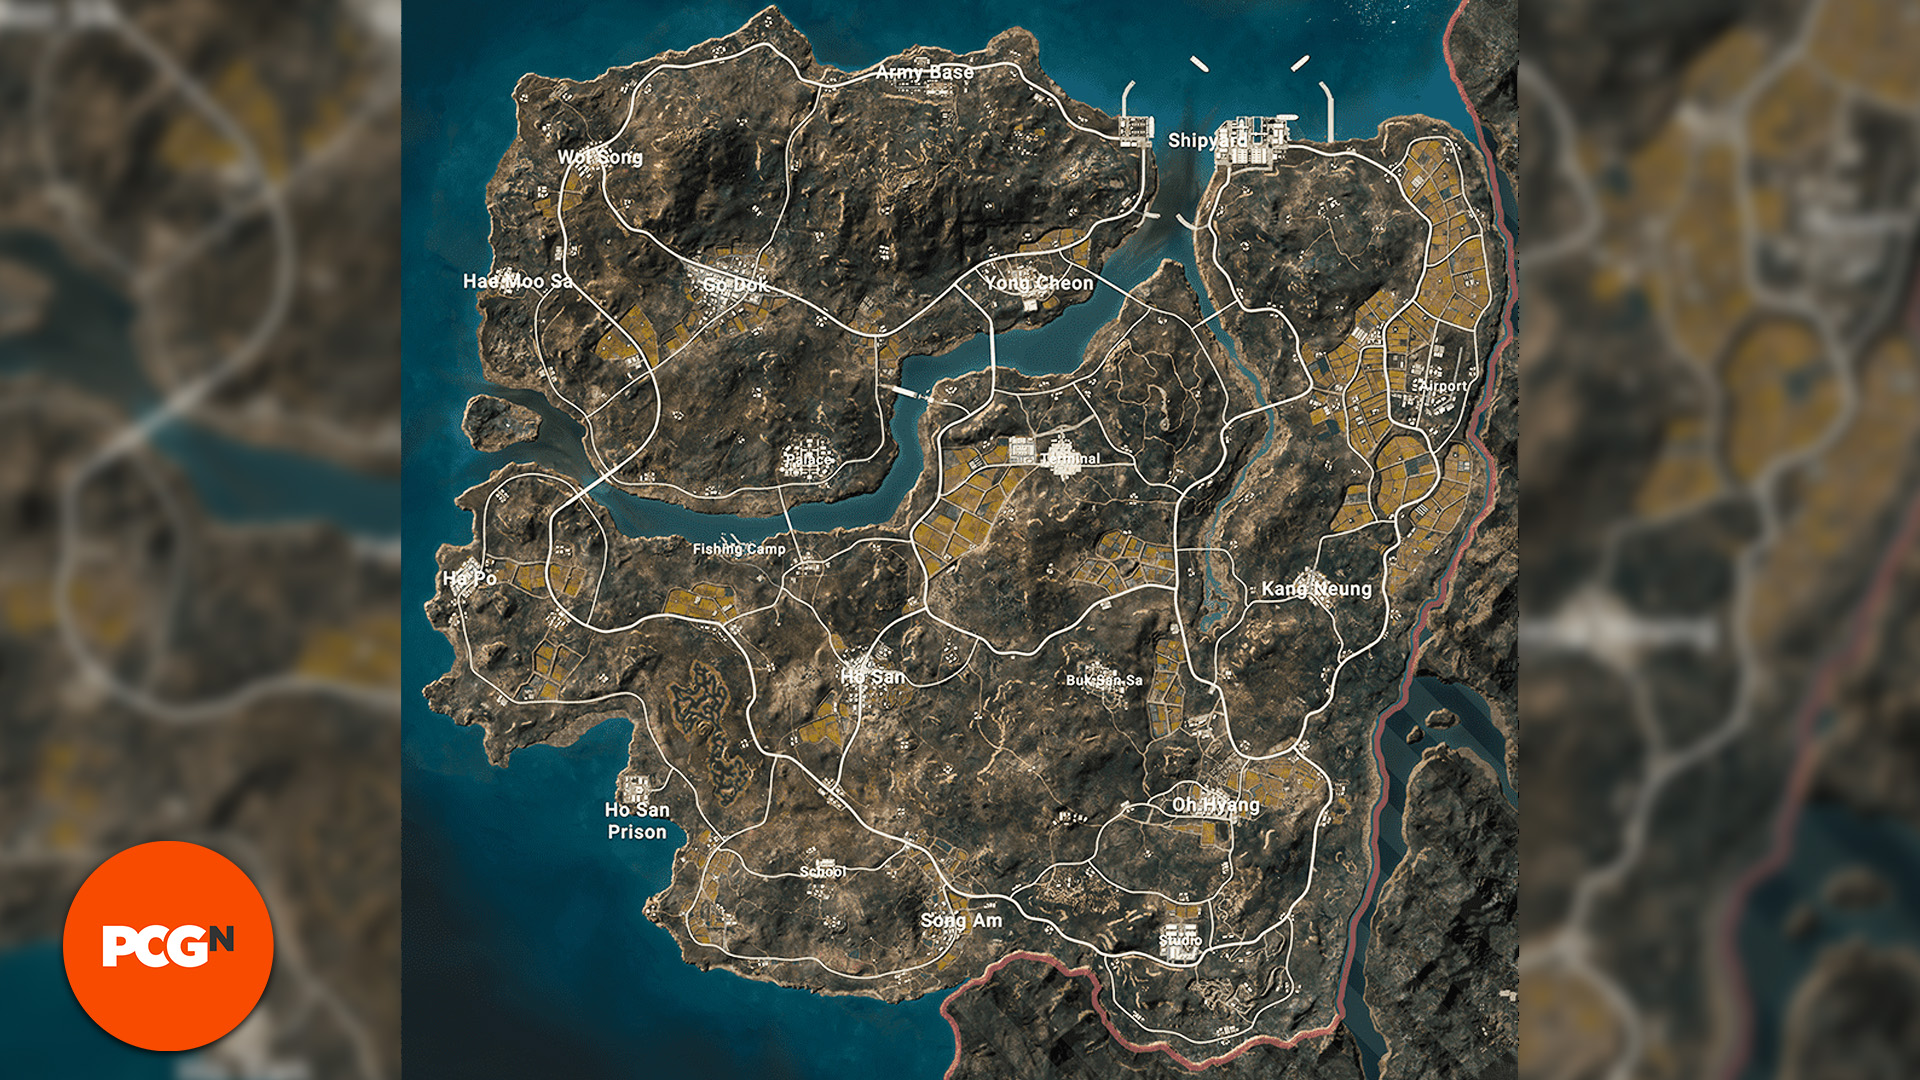 Playerunknowns Battlegrounds PUBG Map: a map view of Taego